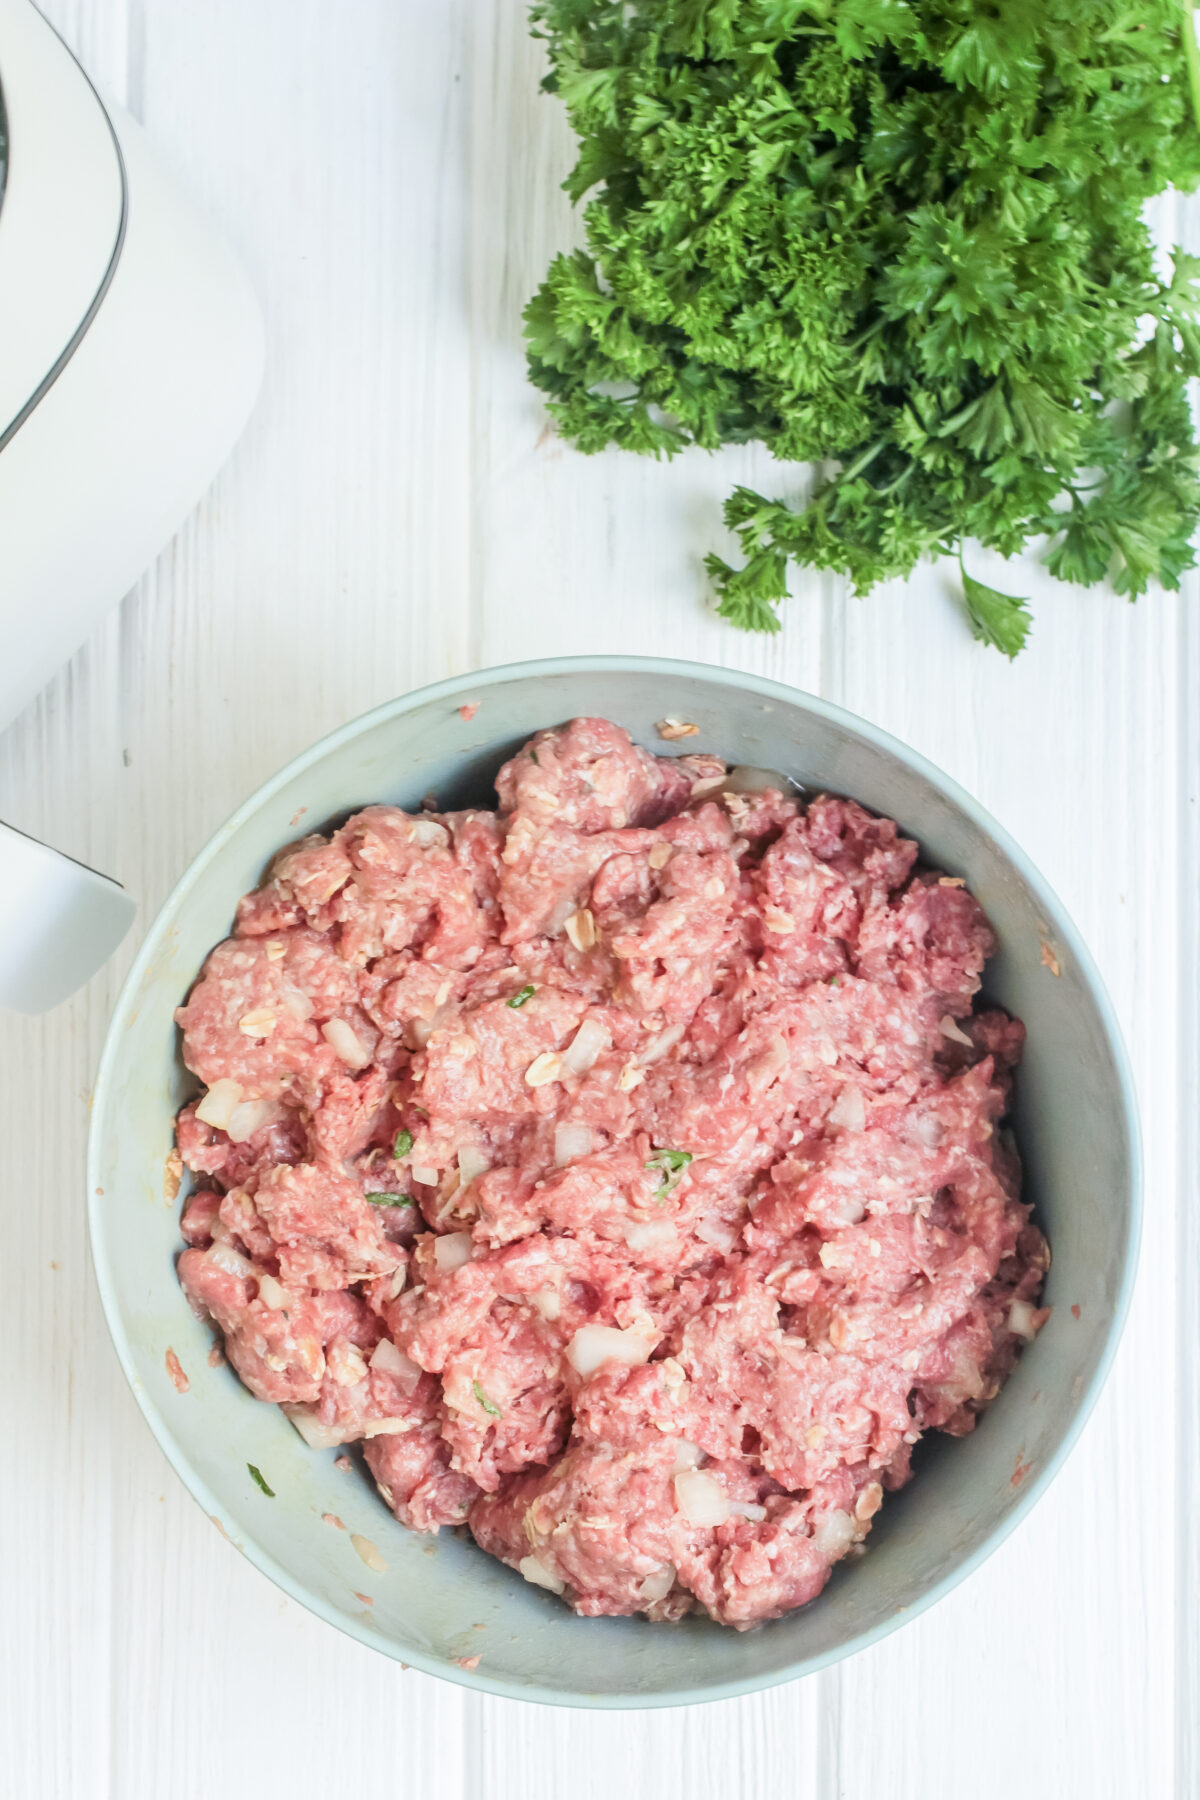 Meatloaf mixture combined in a bowl.